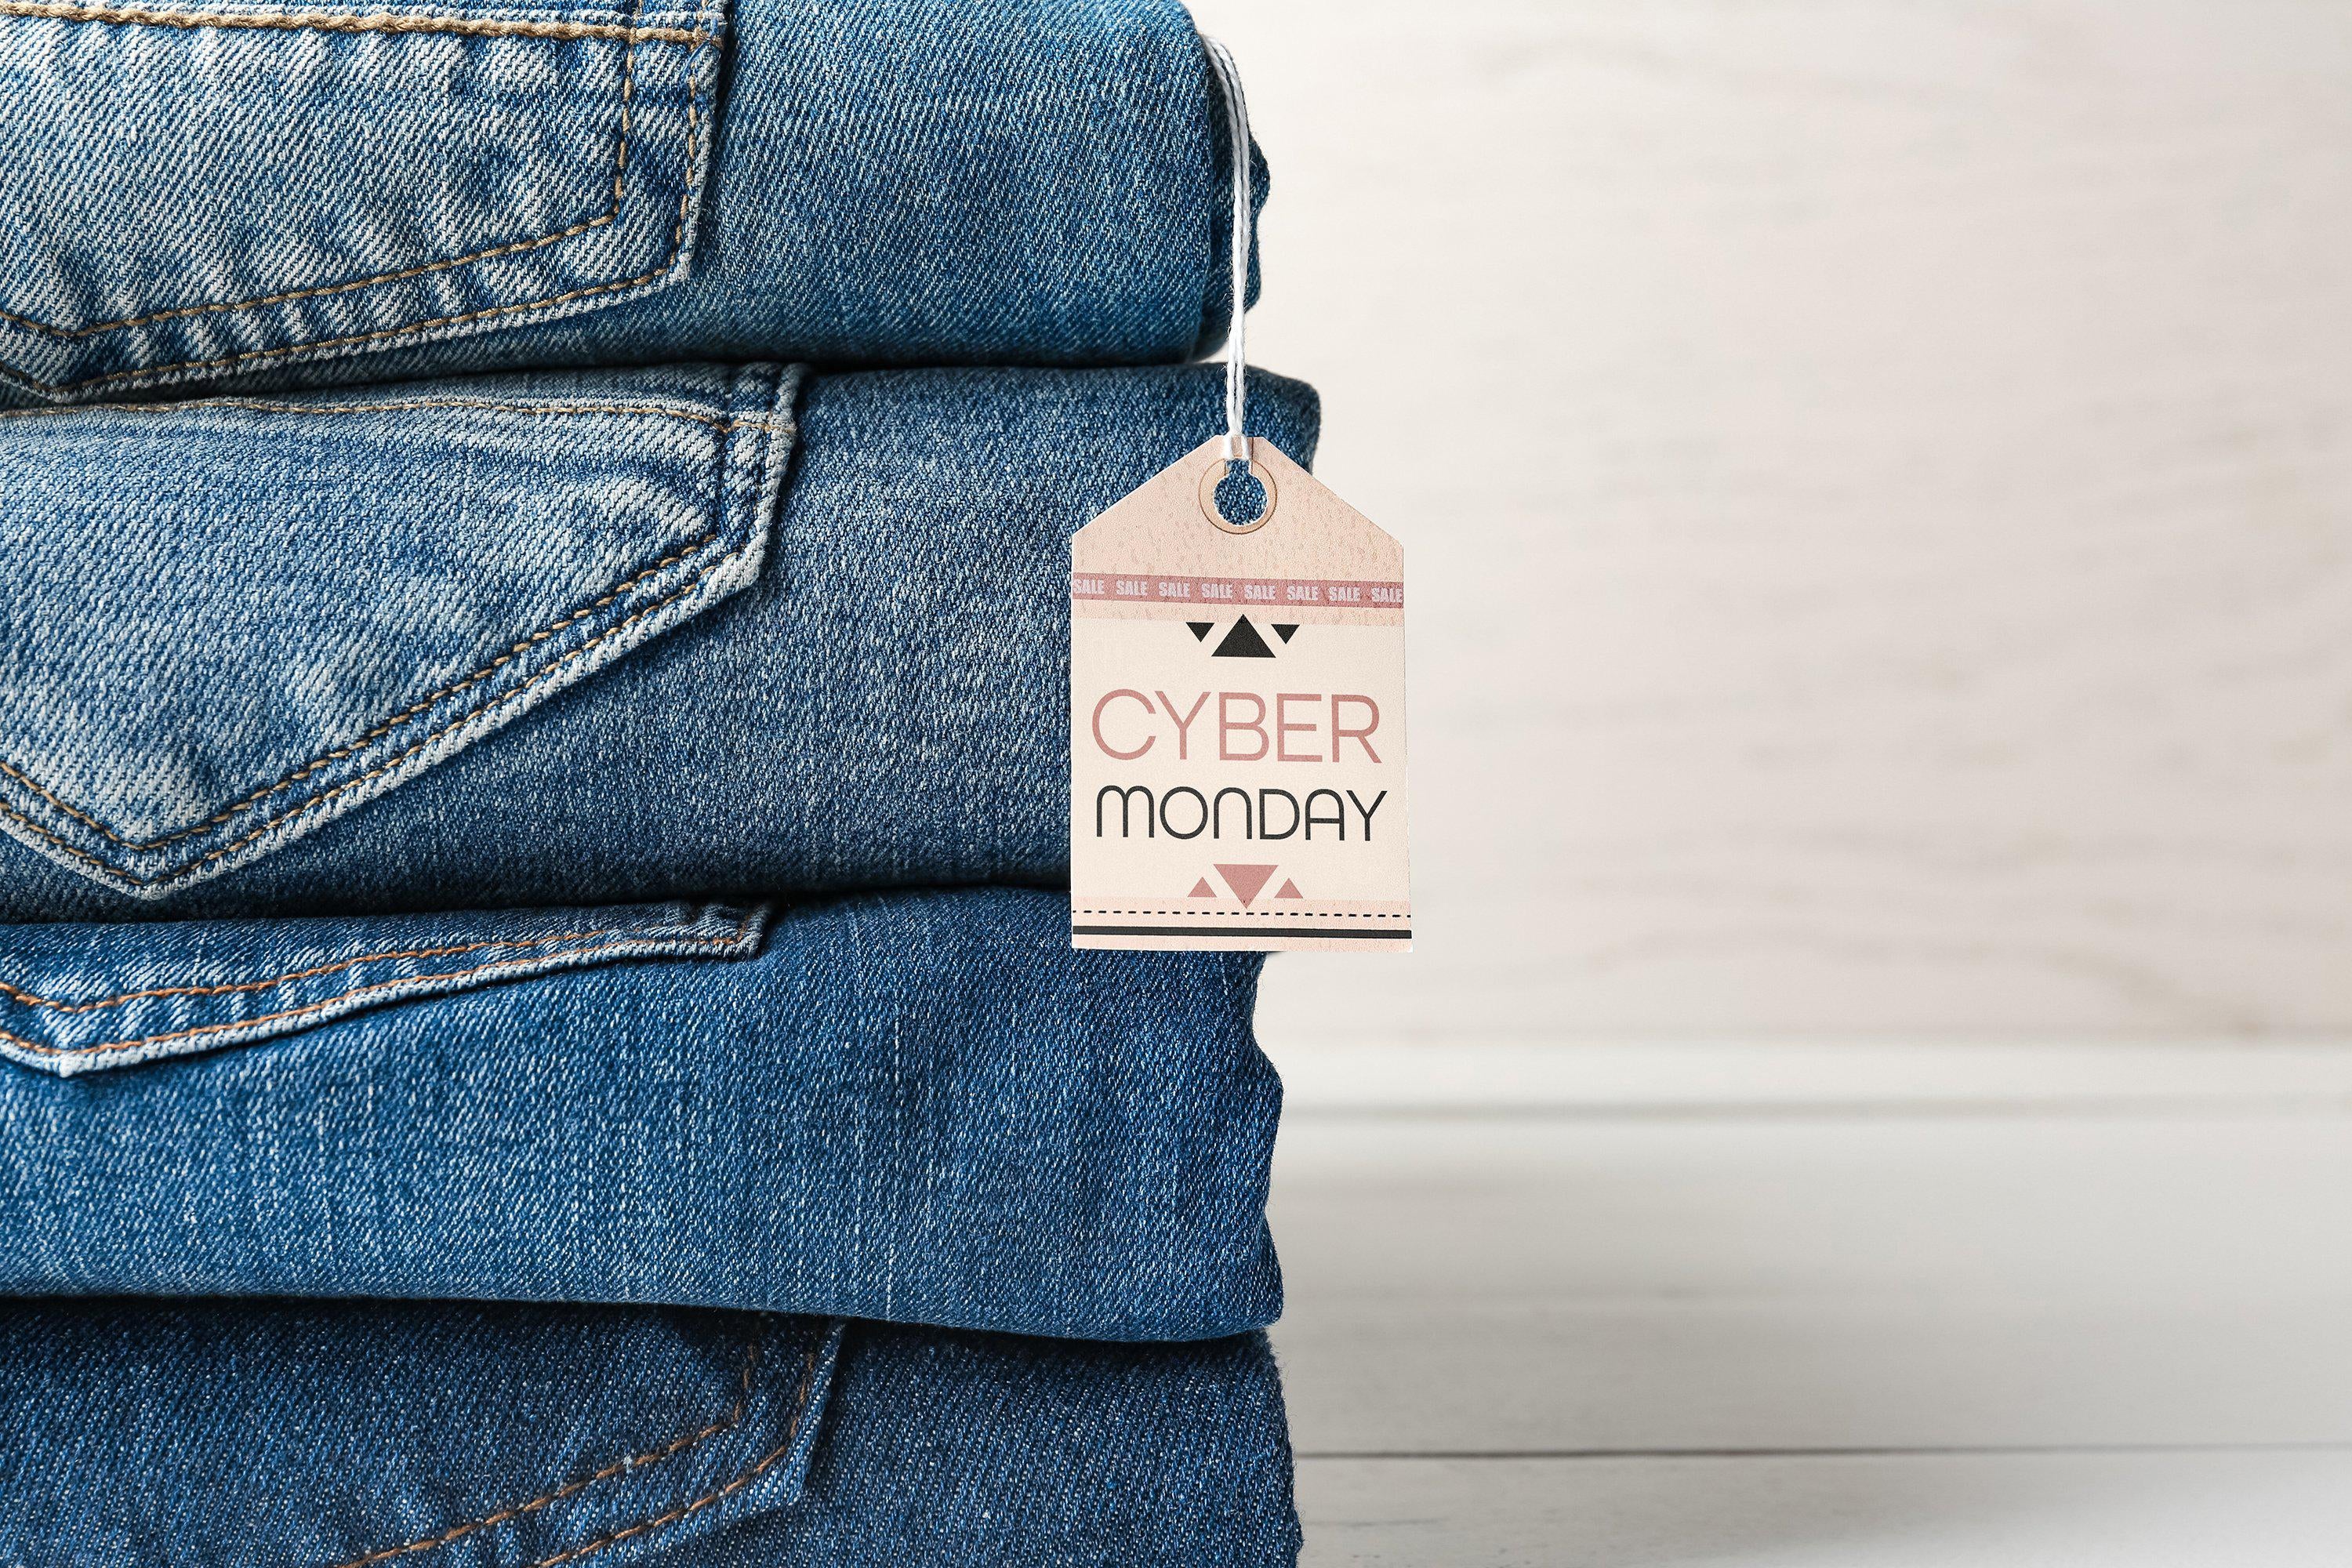 Cyber Monday - best shopping opportunity | Jeans4you.shop